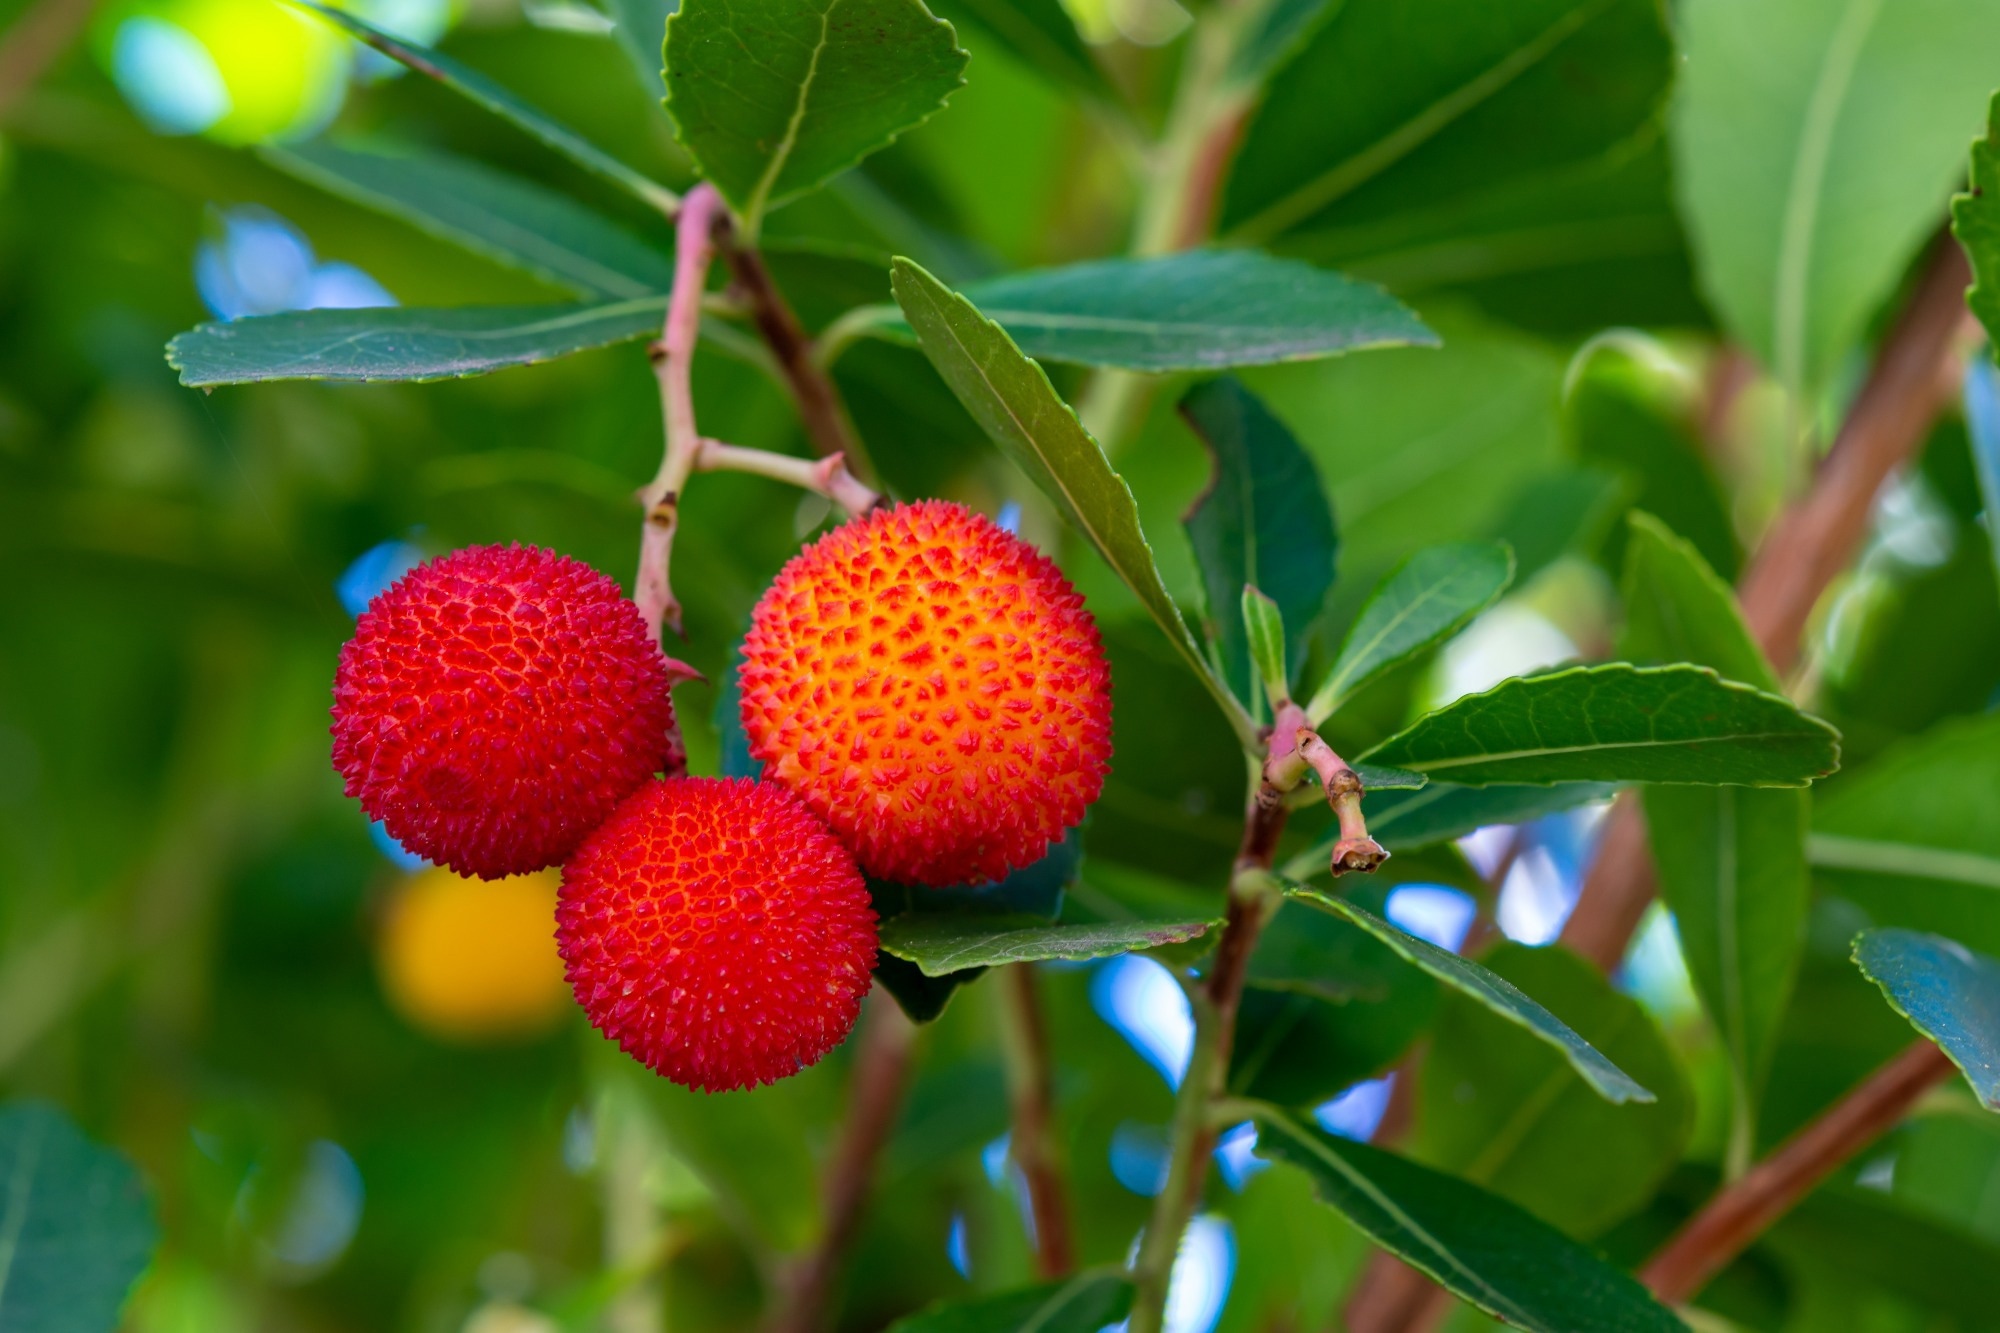 Study: Antioxidant Activity and Inhibition of Digestive Enzymes of New Strawberry Tree Fruit/Apple Smoothies. Image Credit: HJBC / Shutterstock